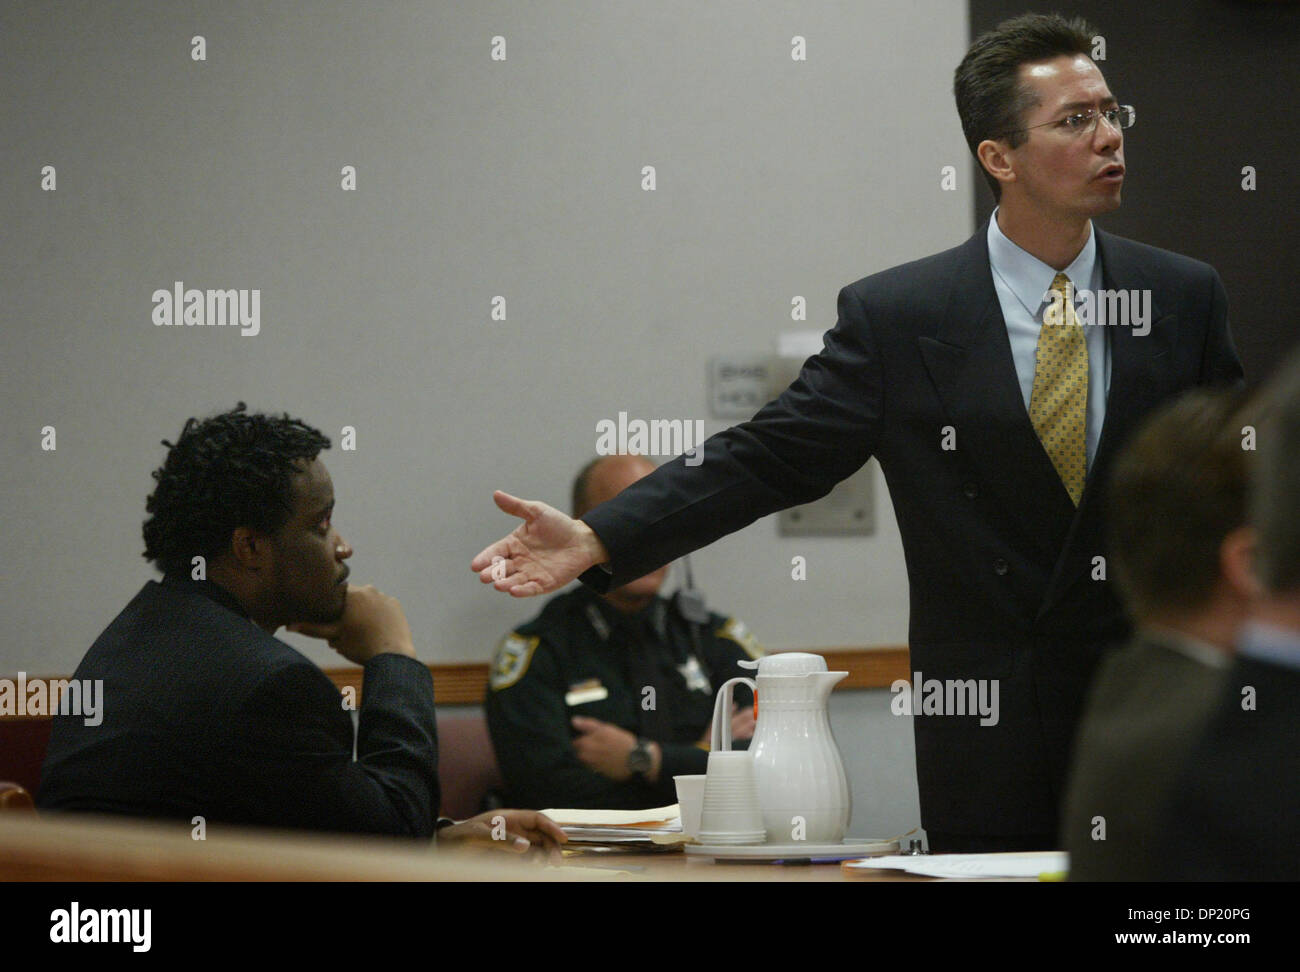 May 12, 2006; Ft. Pierce, FL, USA; At the St. Lucie County Courthouse friday,  defense attorney Michael Heisey gestures towards  his client, Jackson Vernelus, and states with emphasis to the assembled jury that Vernelus is innocent of murder charges.  Vernelus is accused of the  murder of Kenneth Agusta Mills Jr. in November, 2003.  Mandatory Credit: Photo by David Spencer/Palm Bea Stock Photo